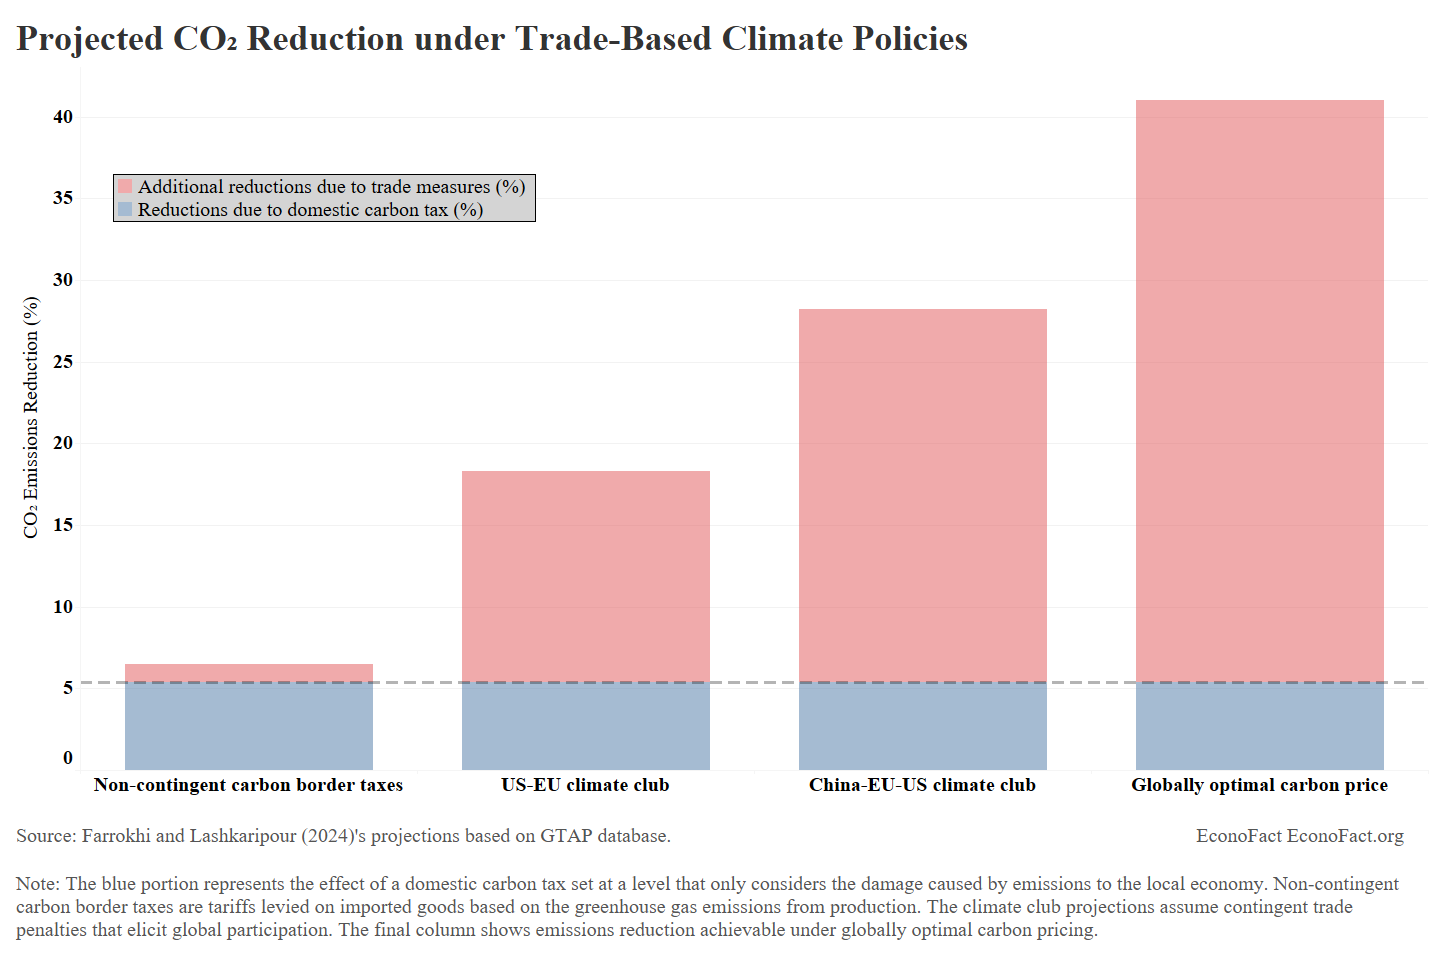 Can Trade Policy Help Combat Climate Change?